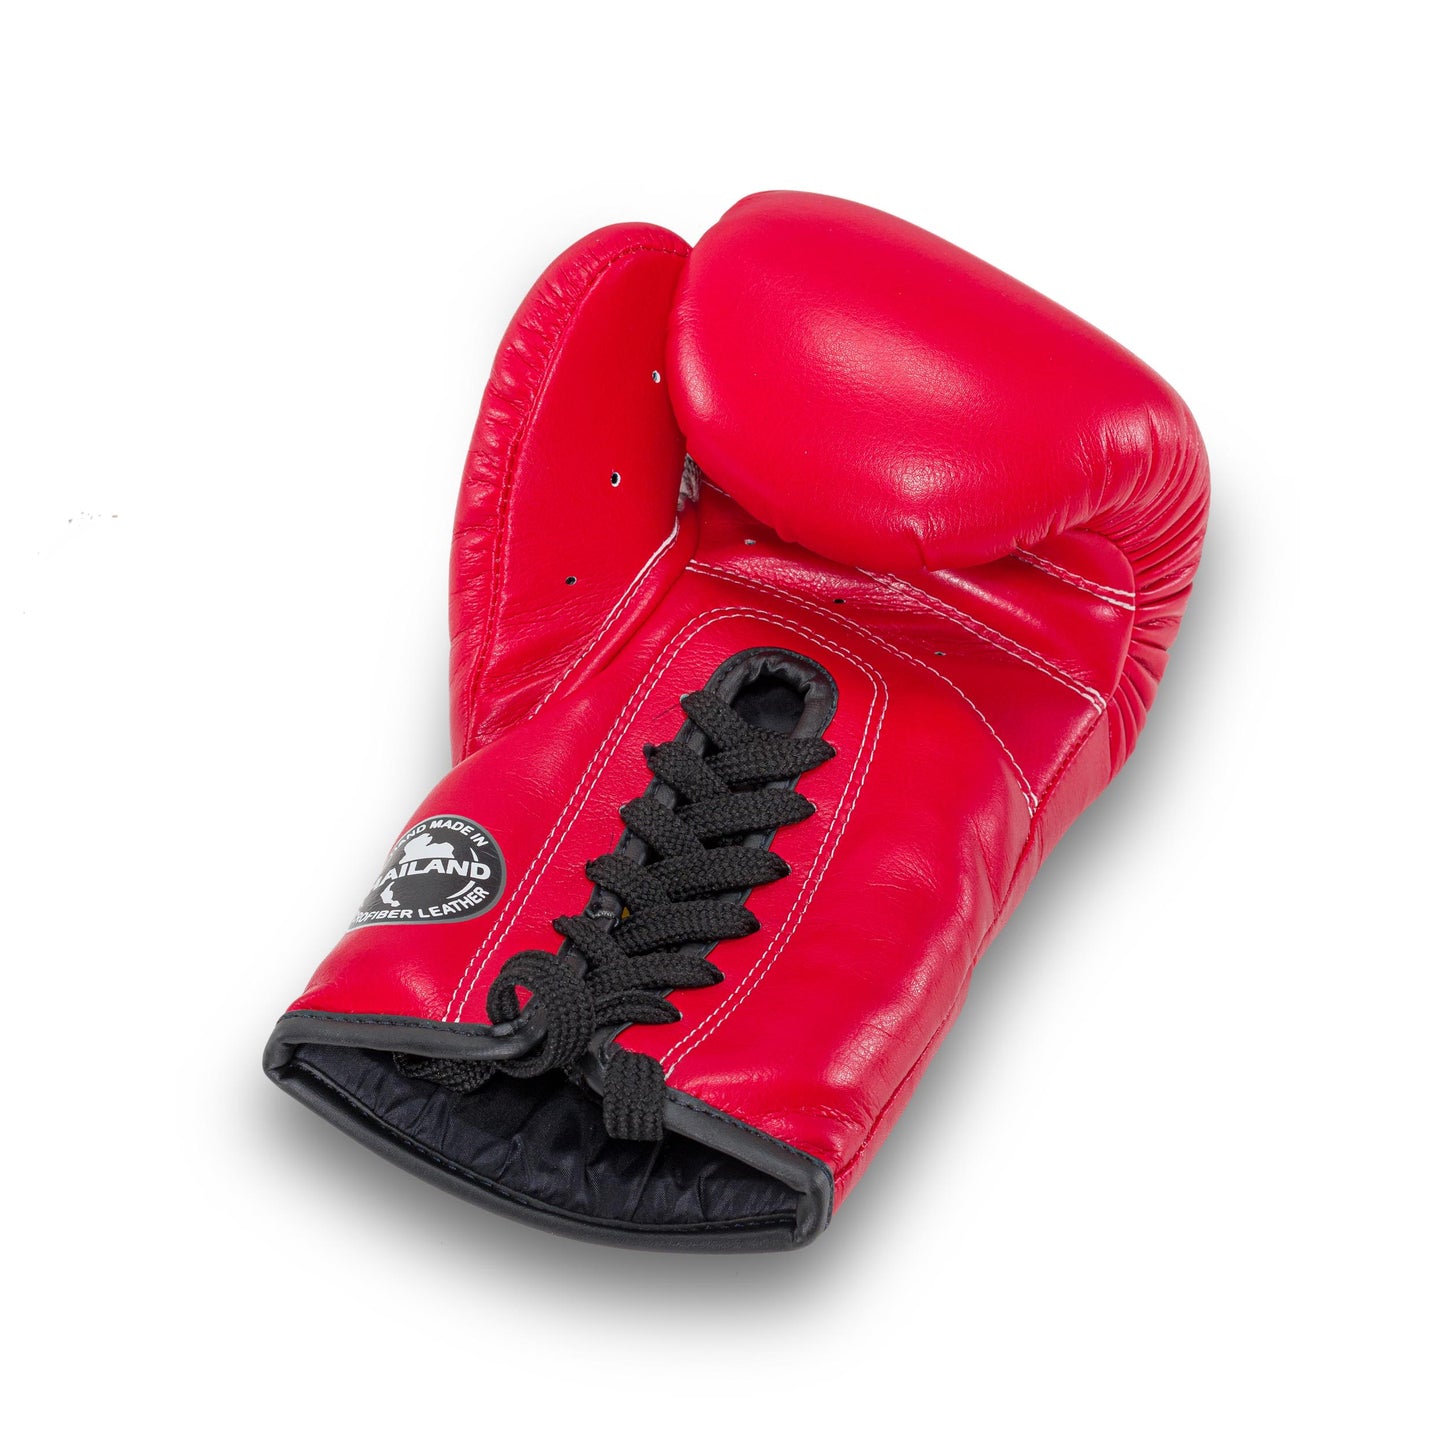 Blegend Boxing Gloves Lace Up Upstyle Red